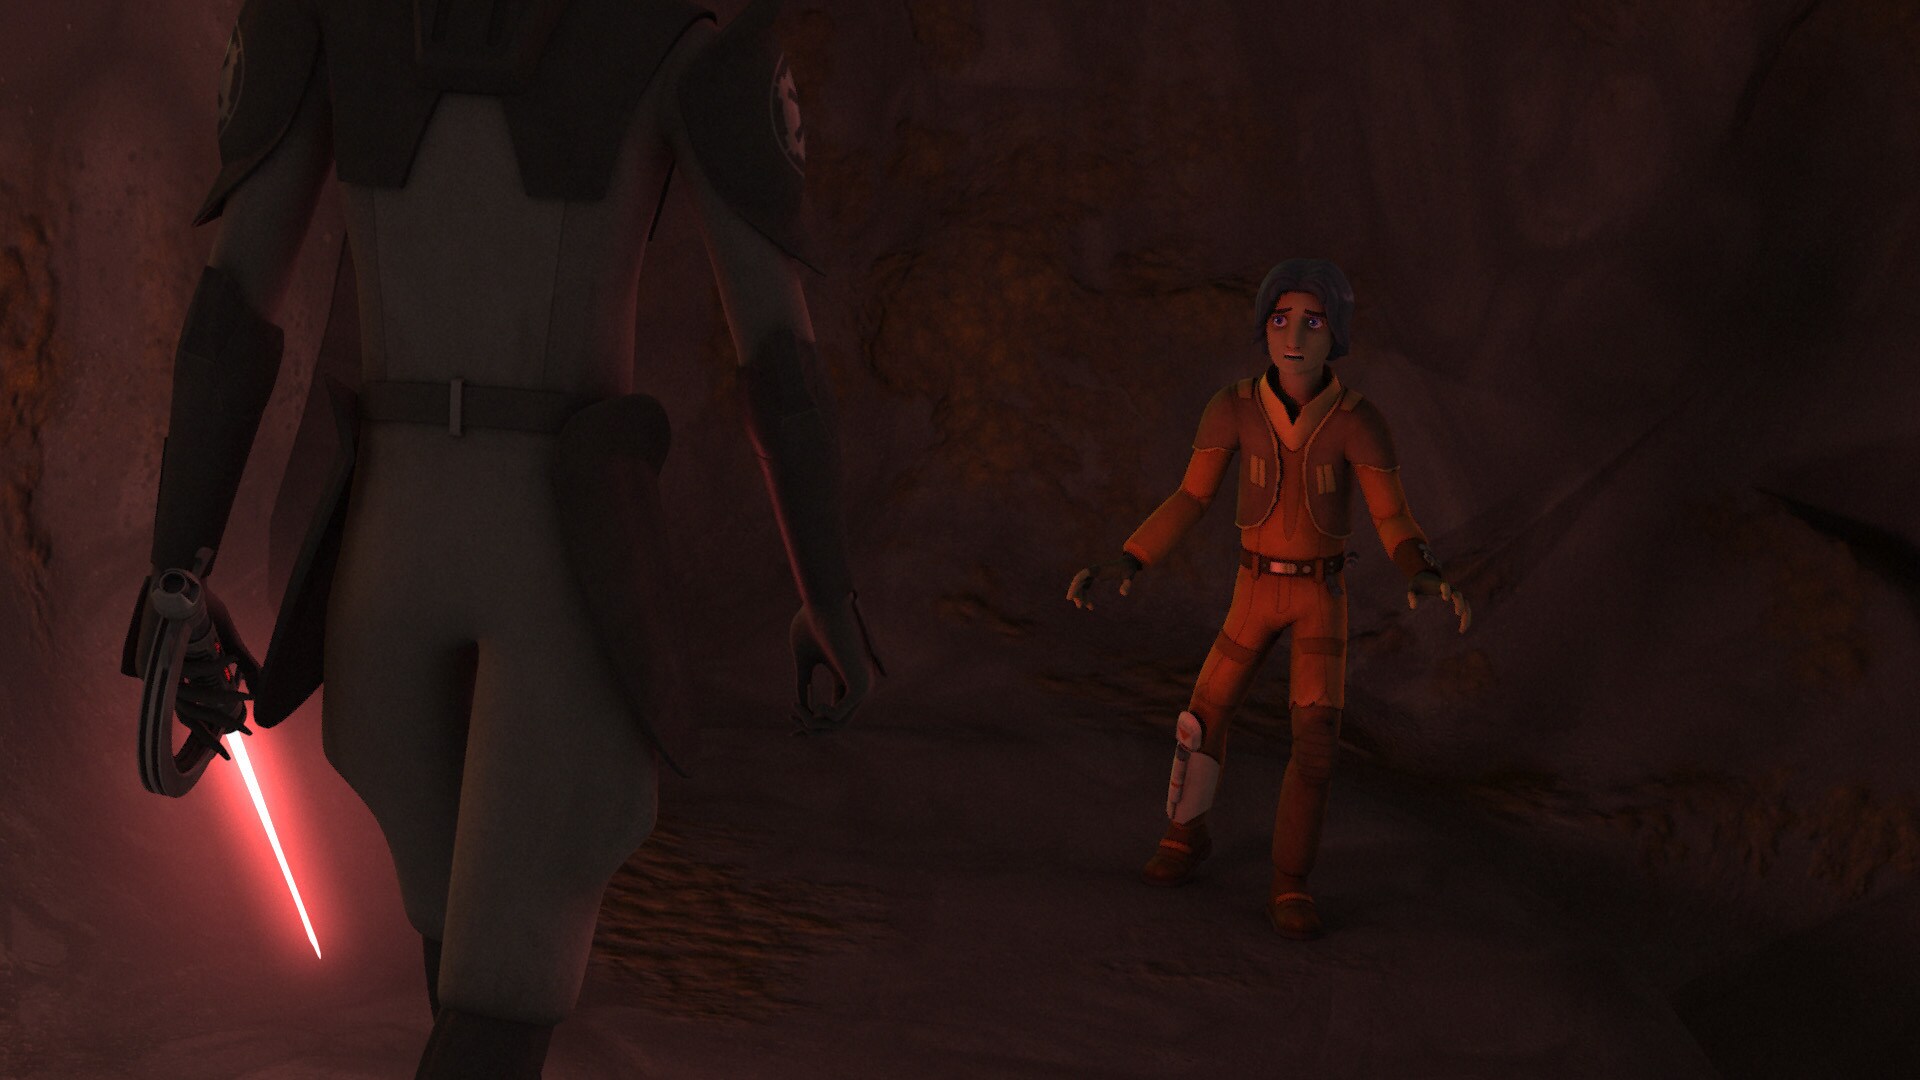 Turning a corner, Ezra finds the Inquisitor standing over an injured Kanan. As the Jedi hunter wa...